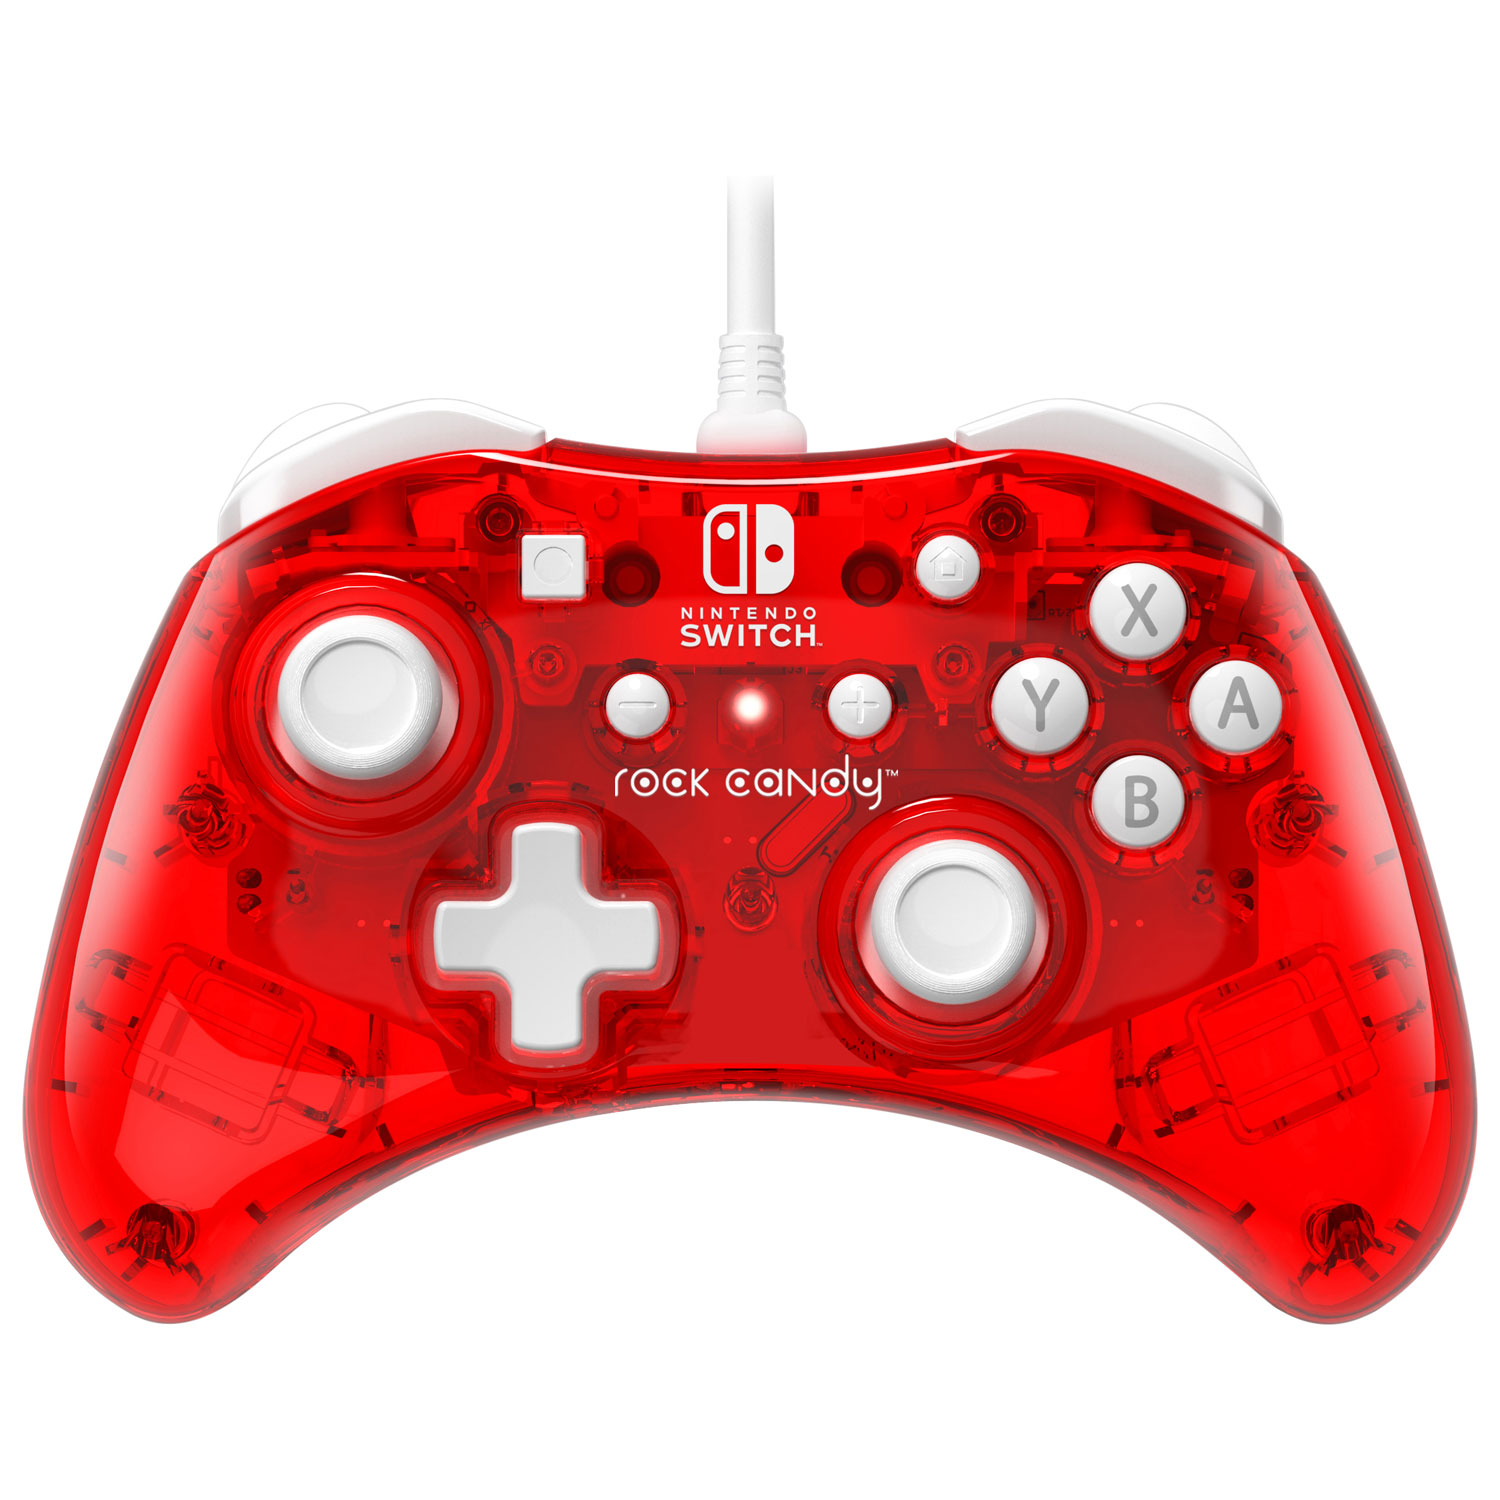 PDP Rock Candy Wired Controller for Switch - Red